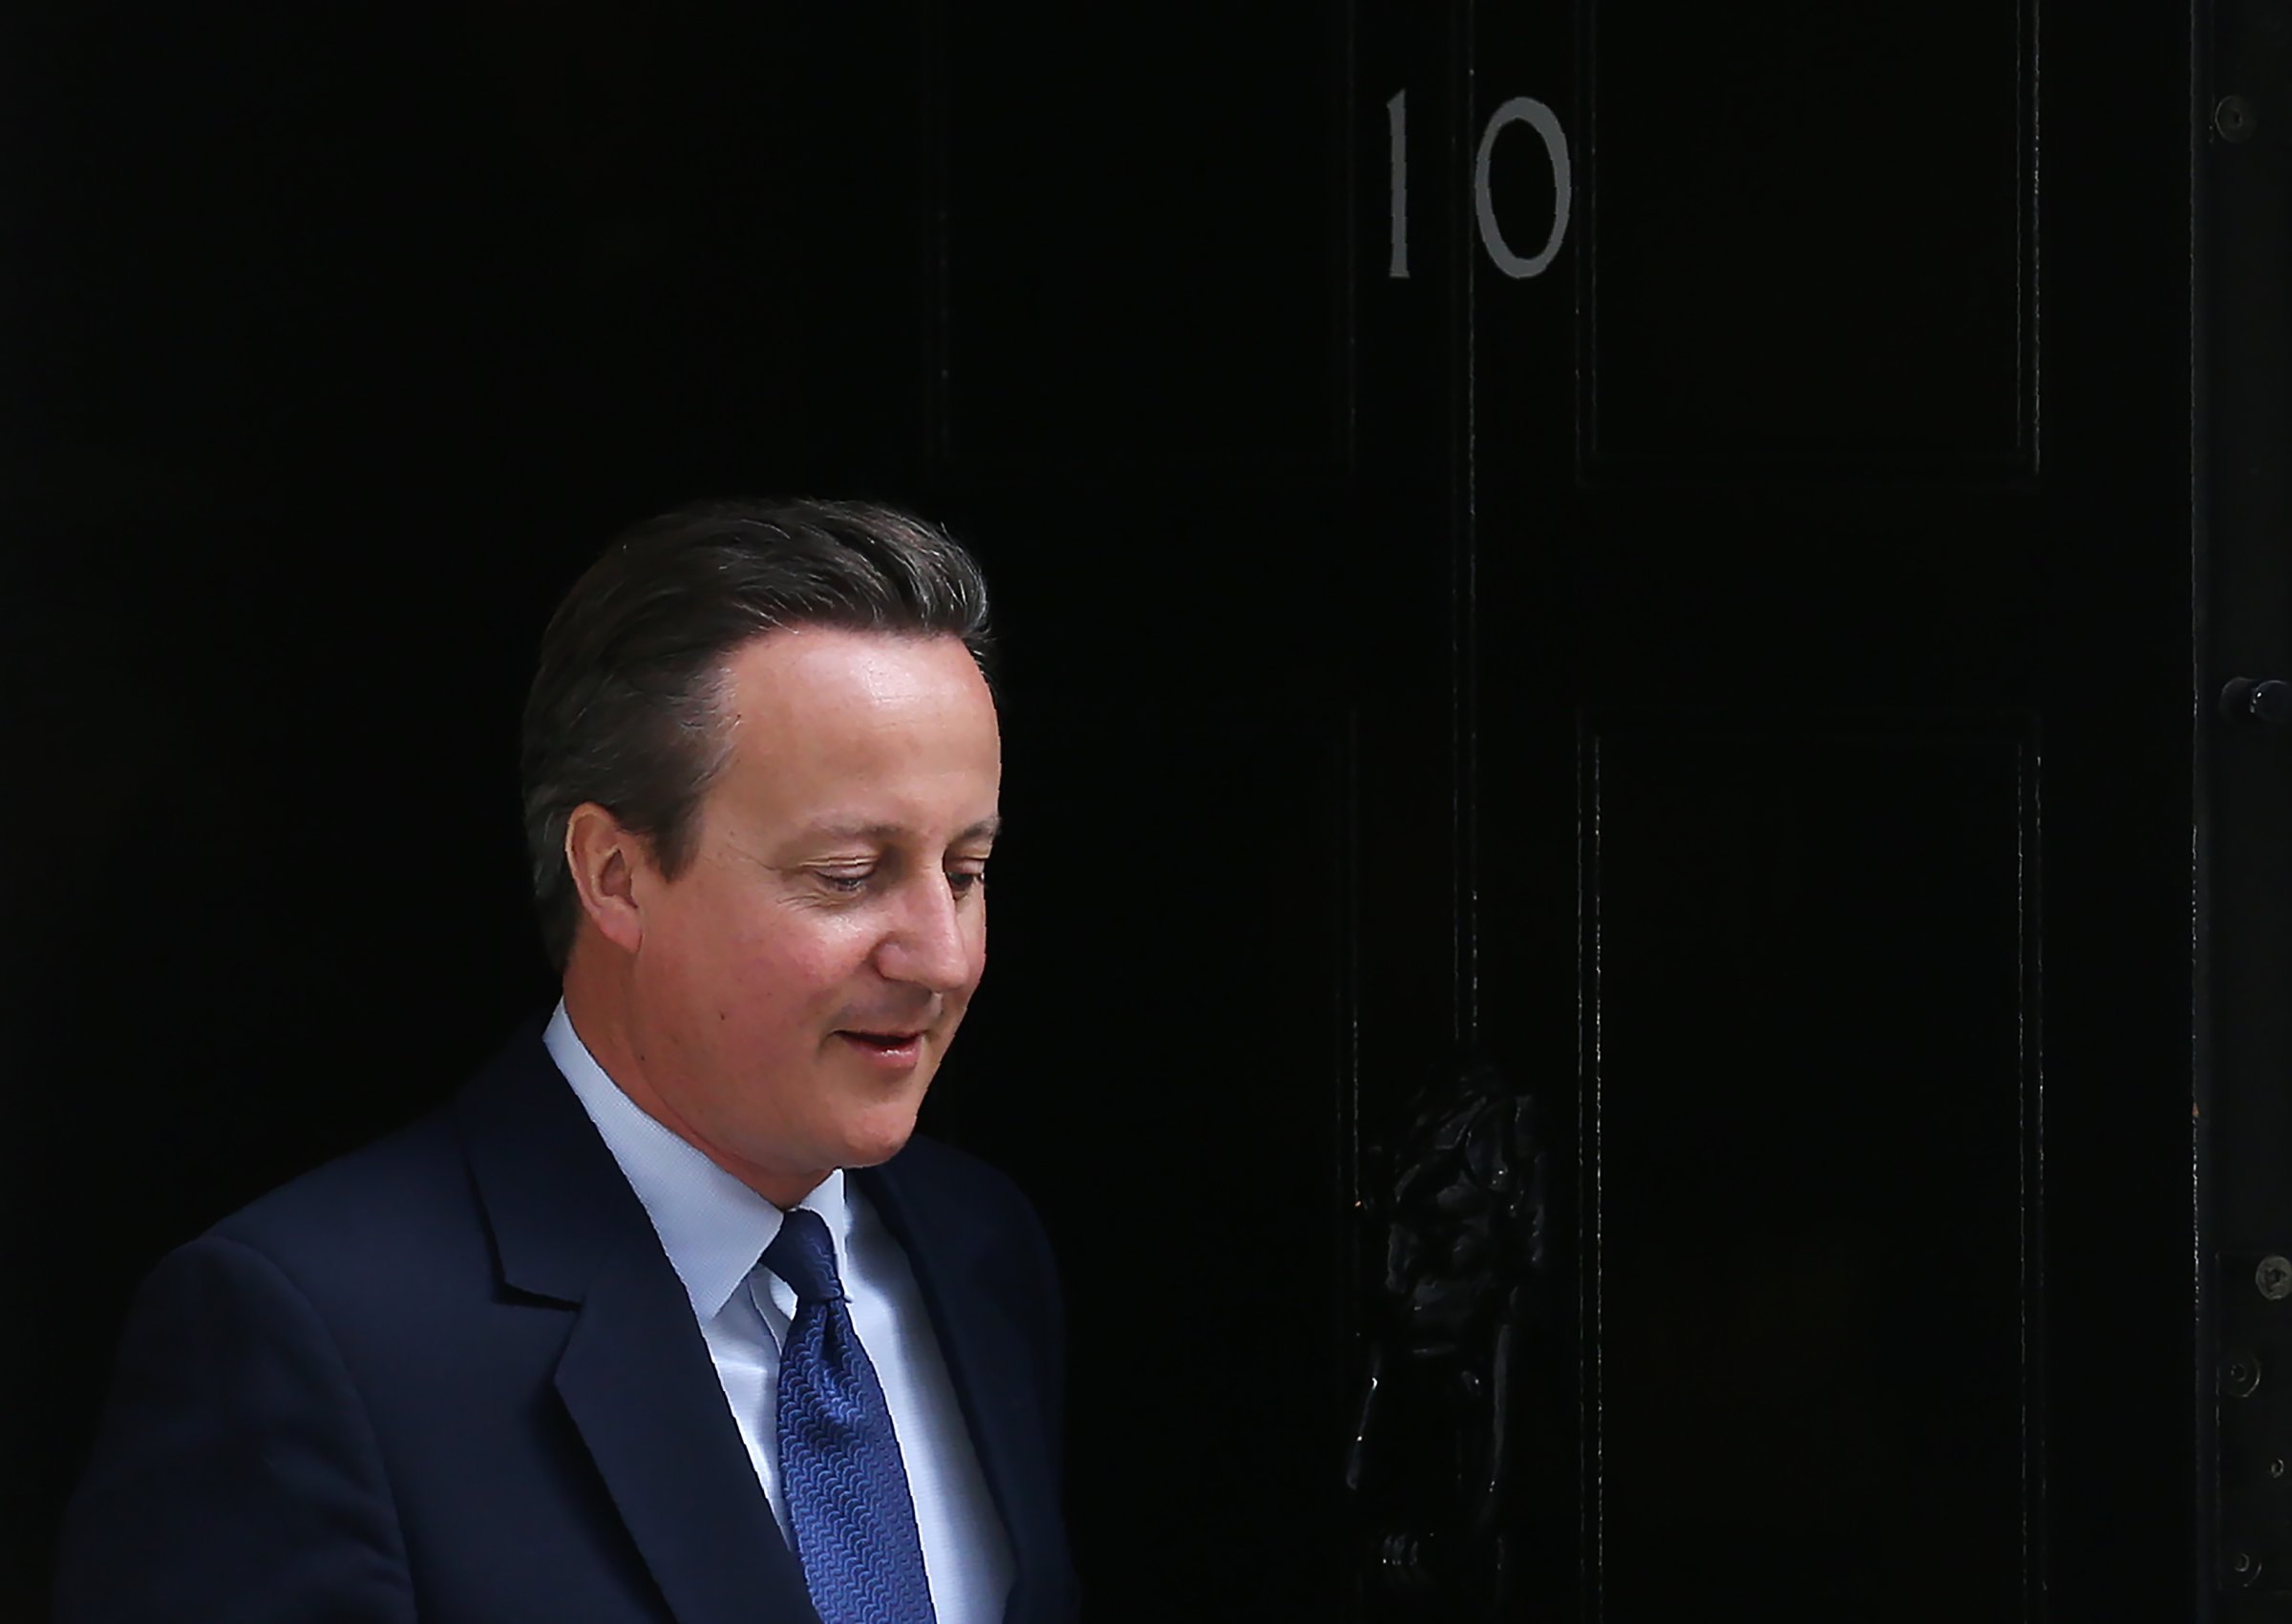 Britain's ougoing Prime Minister David Cameron leaves 10 Downing Street as he prepares to address his final Prime Minister's Question Time in the House of Commons in London on July 13, 2016.